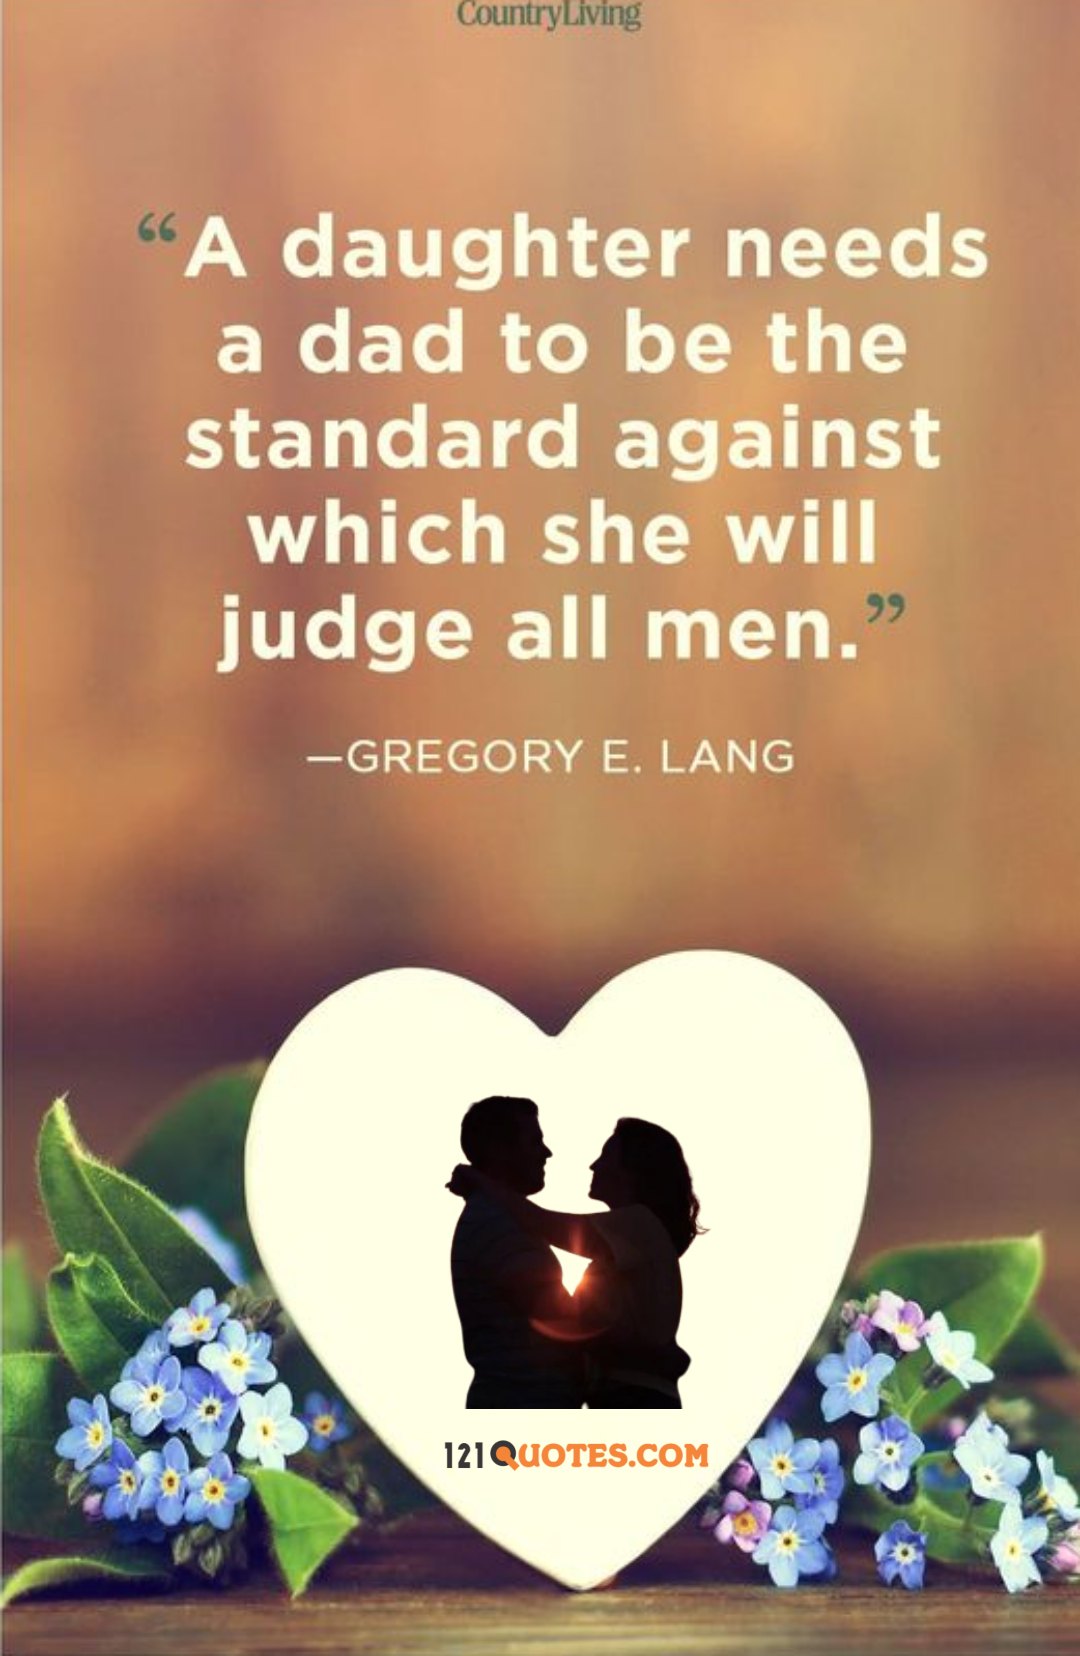  father daughter love images download